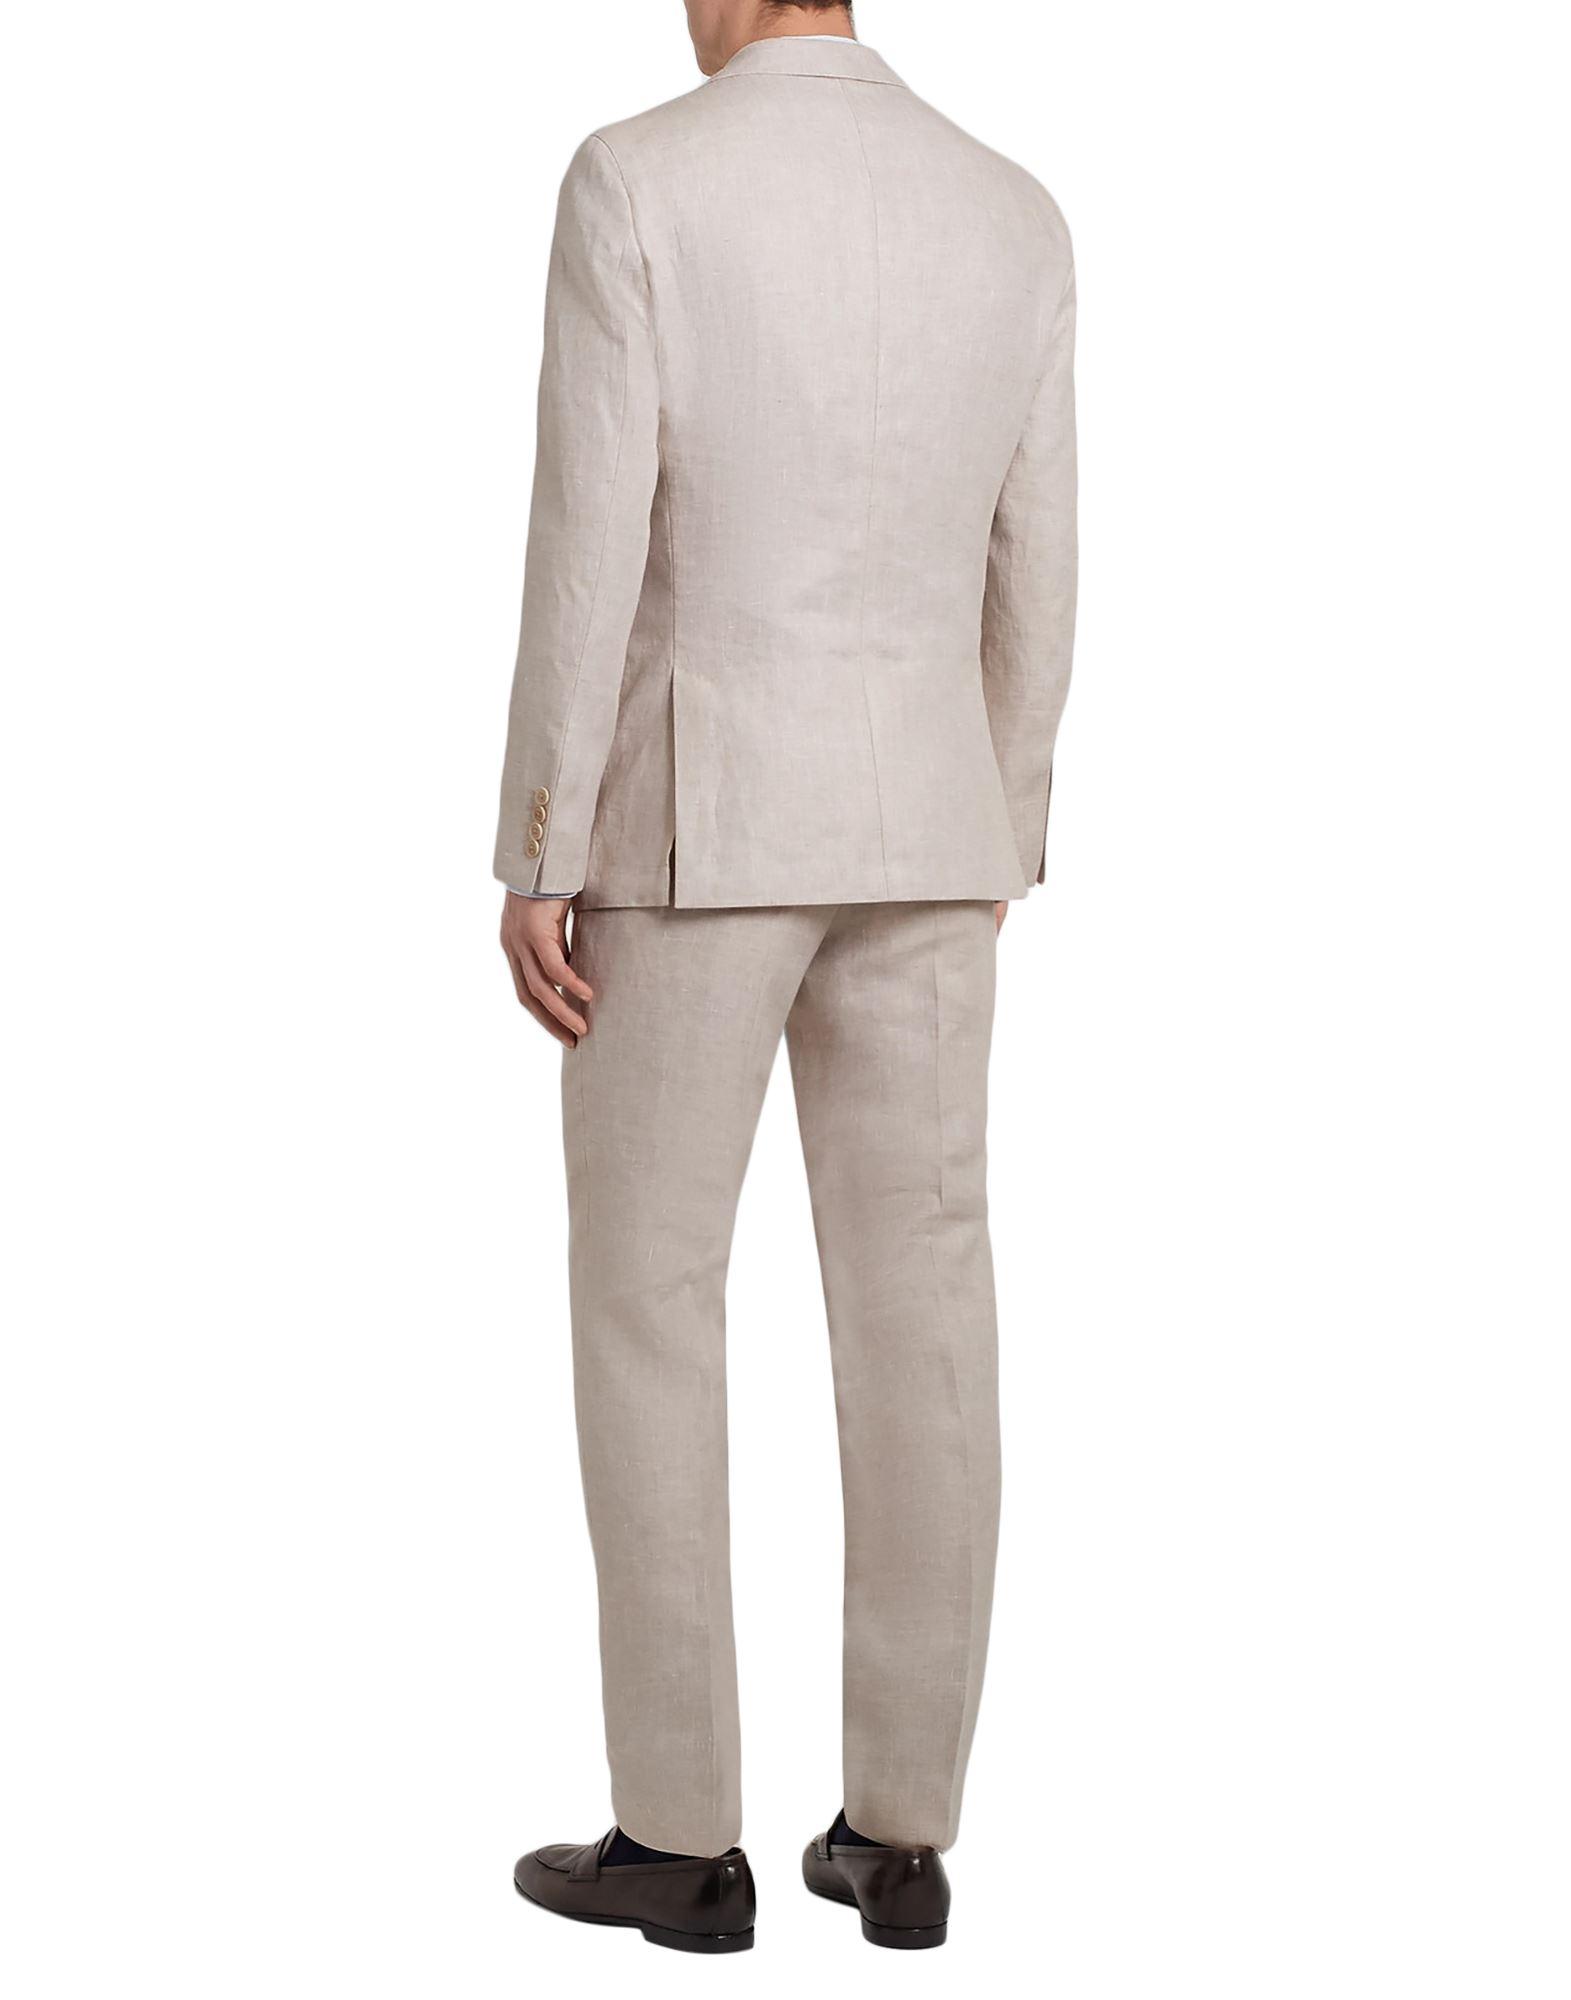 Absolut at styre søn BOSS by HUGO BOSS Suit in Natural for Men | Lyst